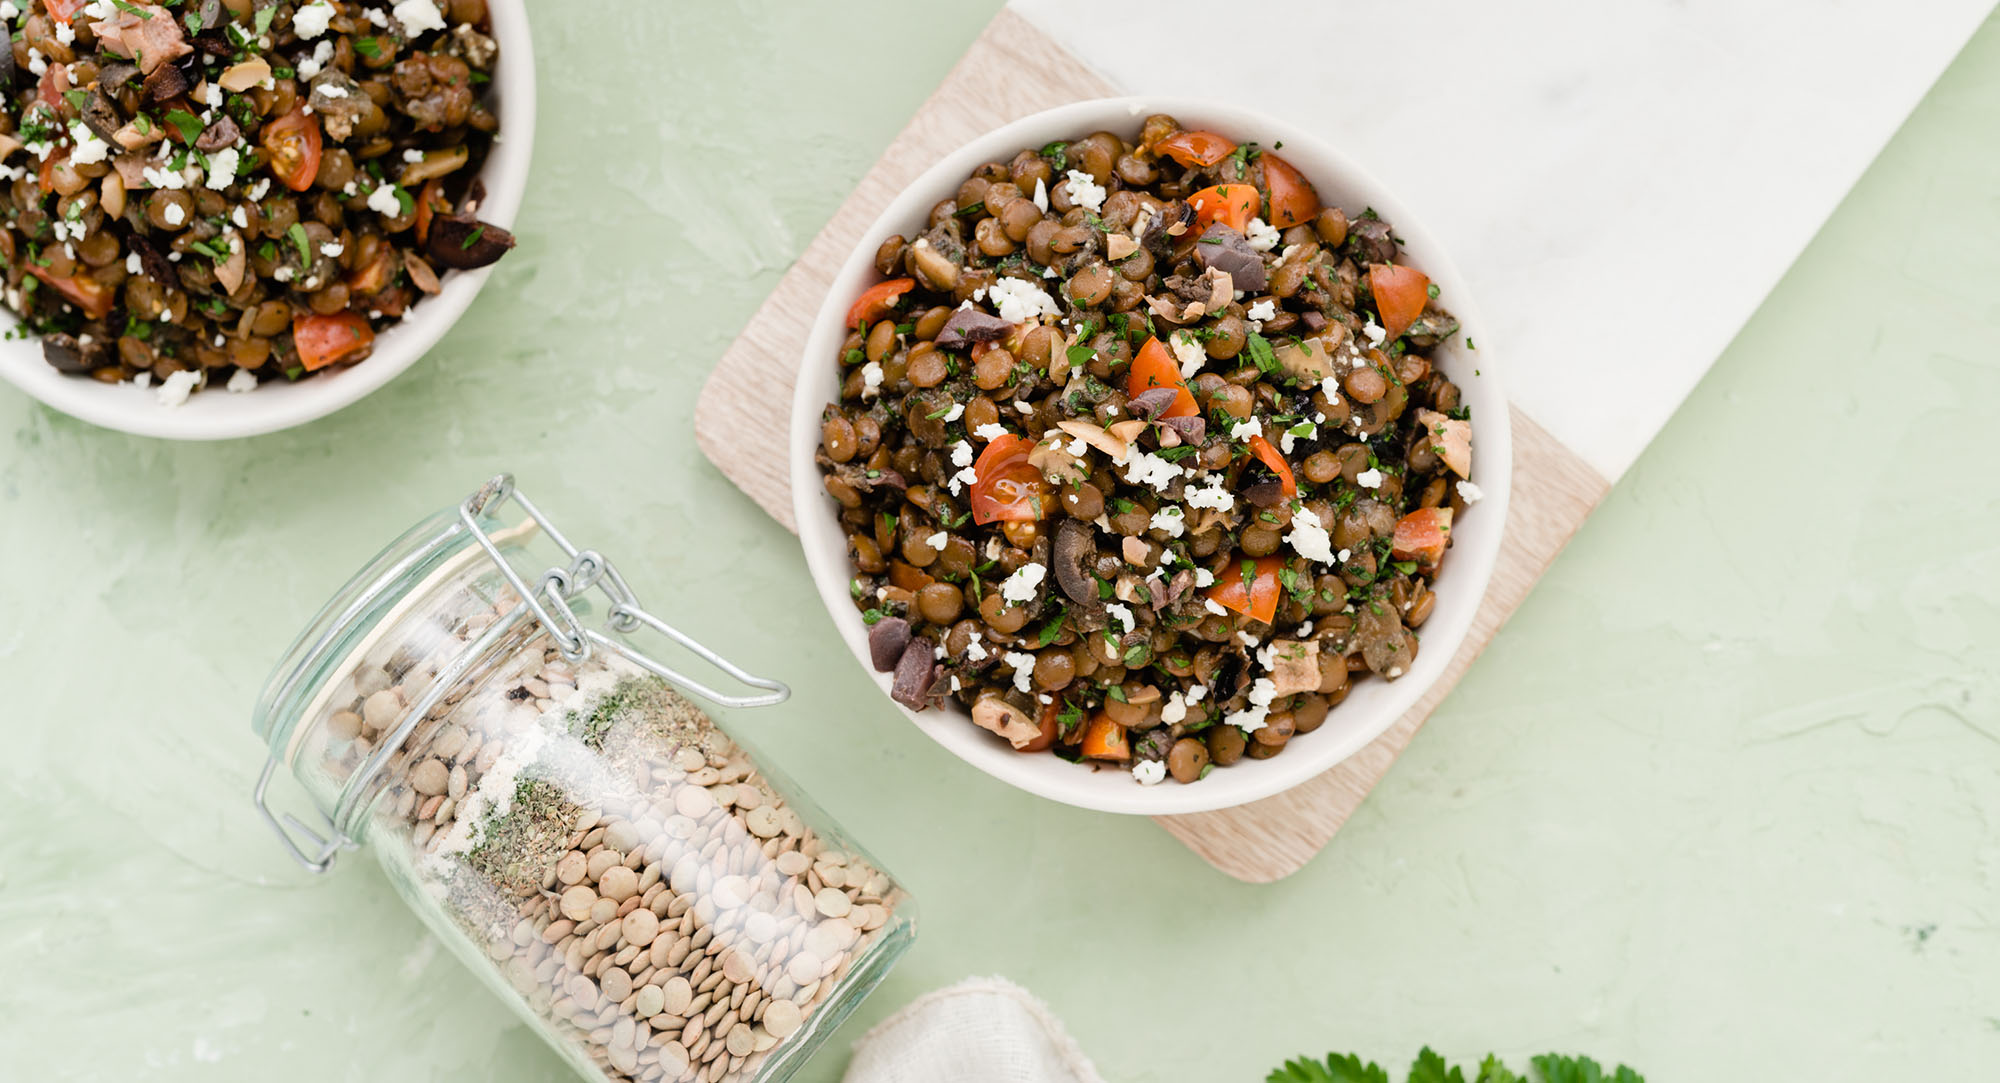 Lentils and Mediterranean spices